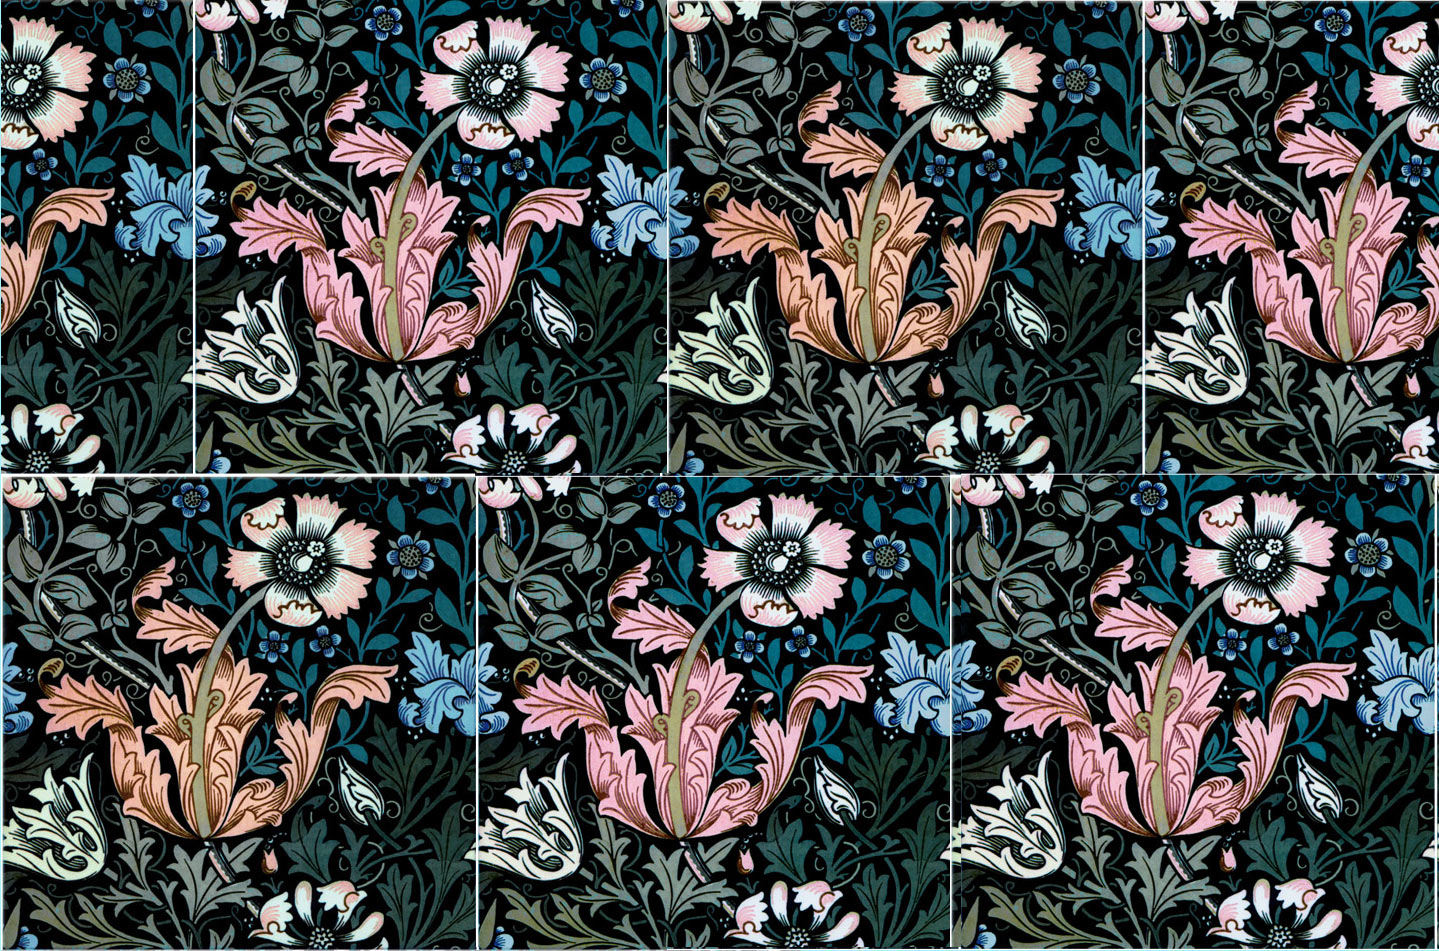 William Morris Compton tiles, Summer Fireworks limited edition tiles